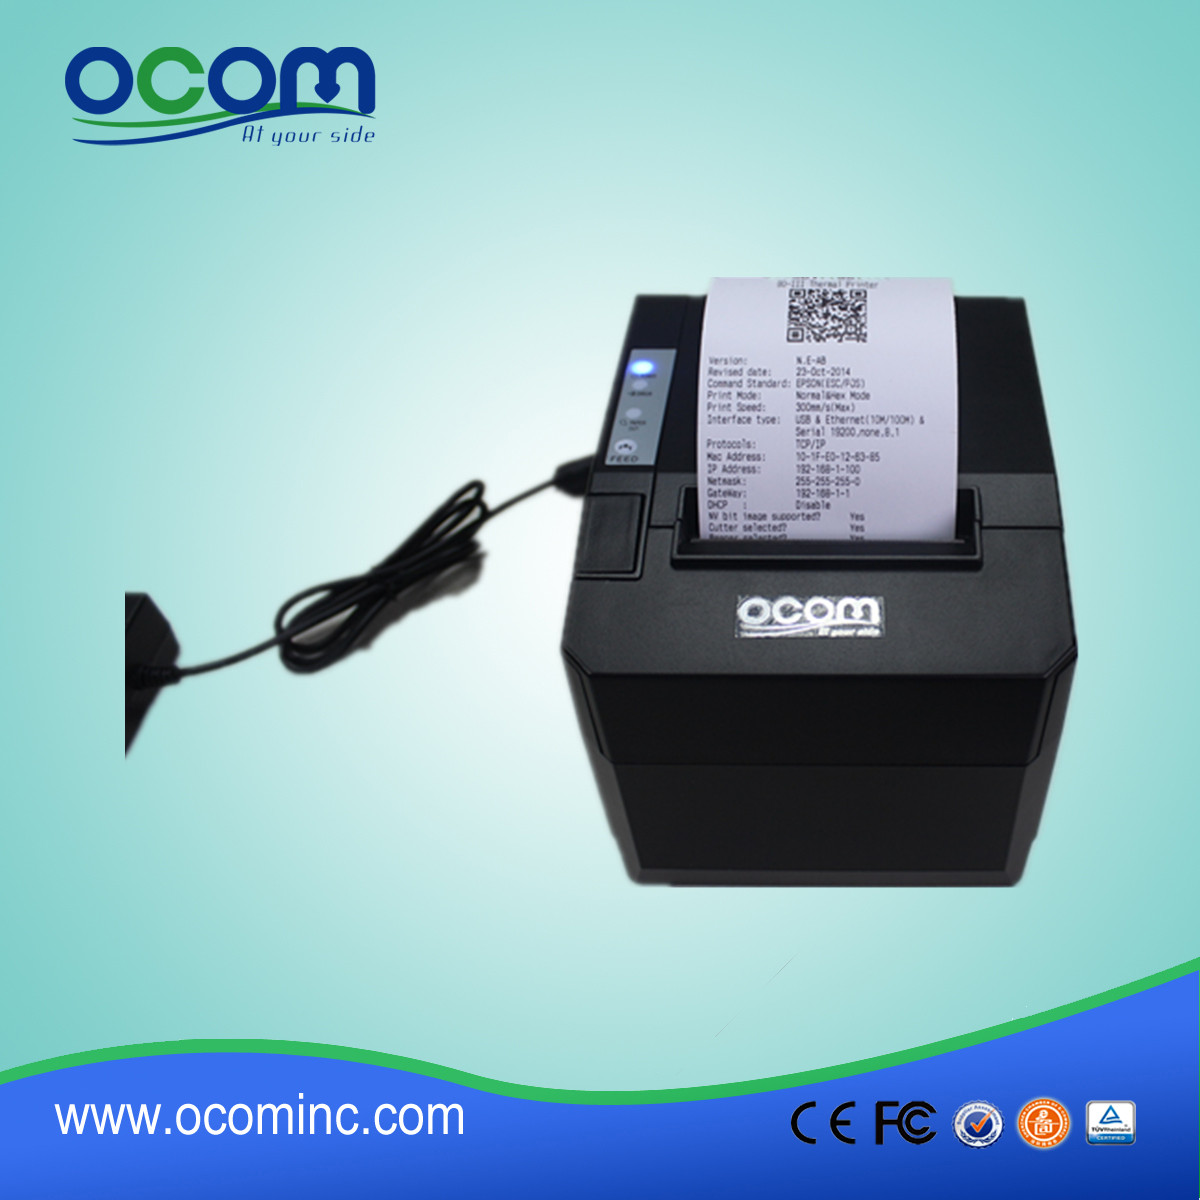 Low-Priced 80mm Android USB thermische printer OCPP-88A-U